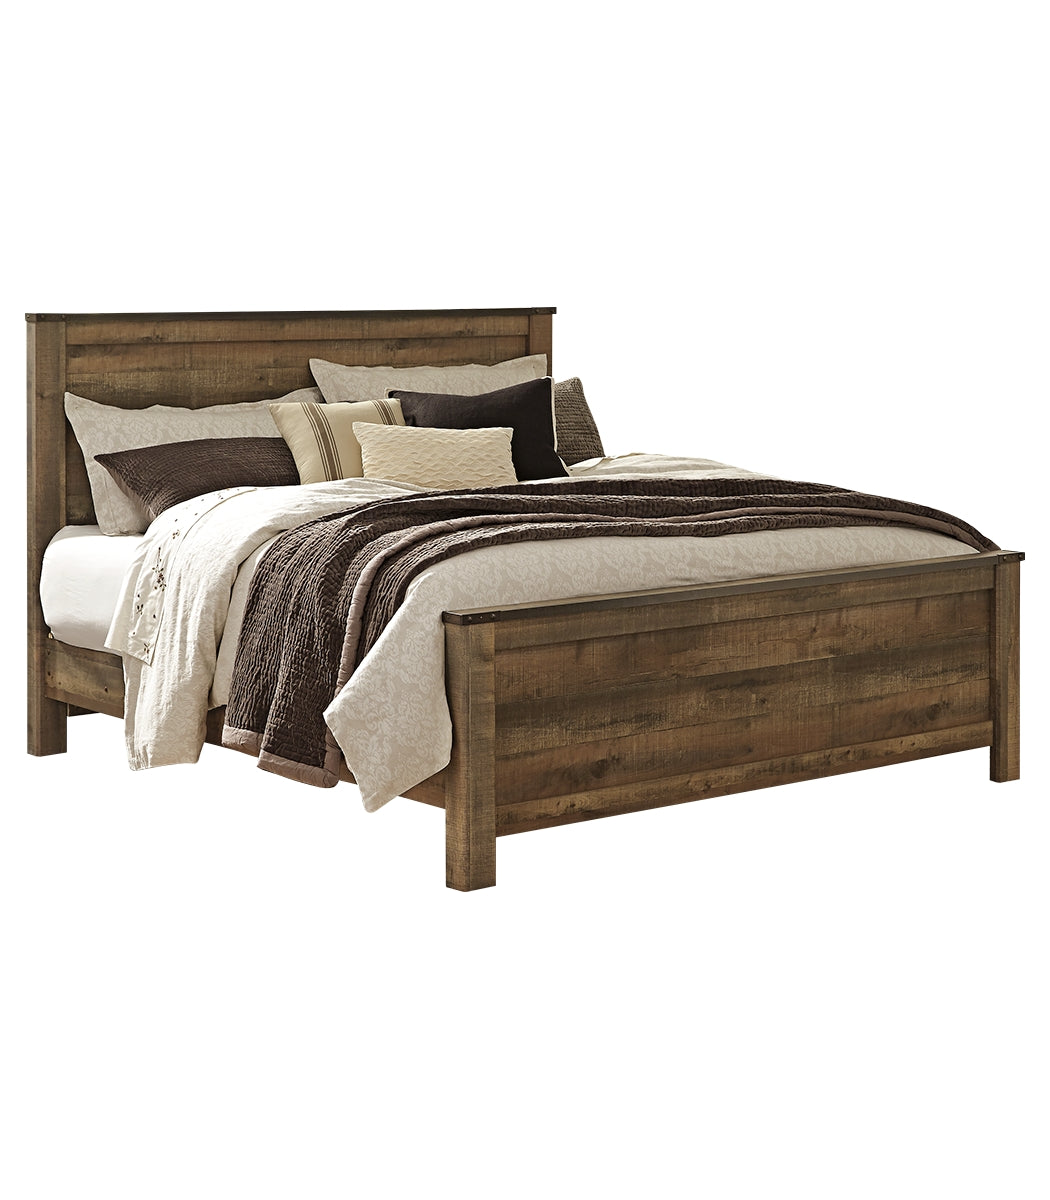 Trinell King Panel Bed with Dresser and 2 Nightstands